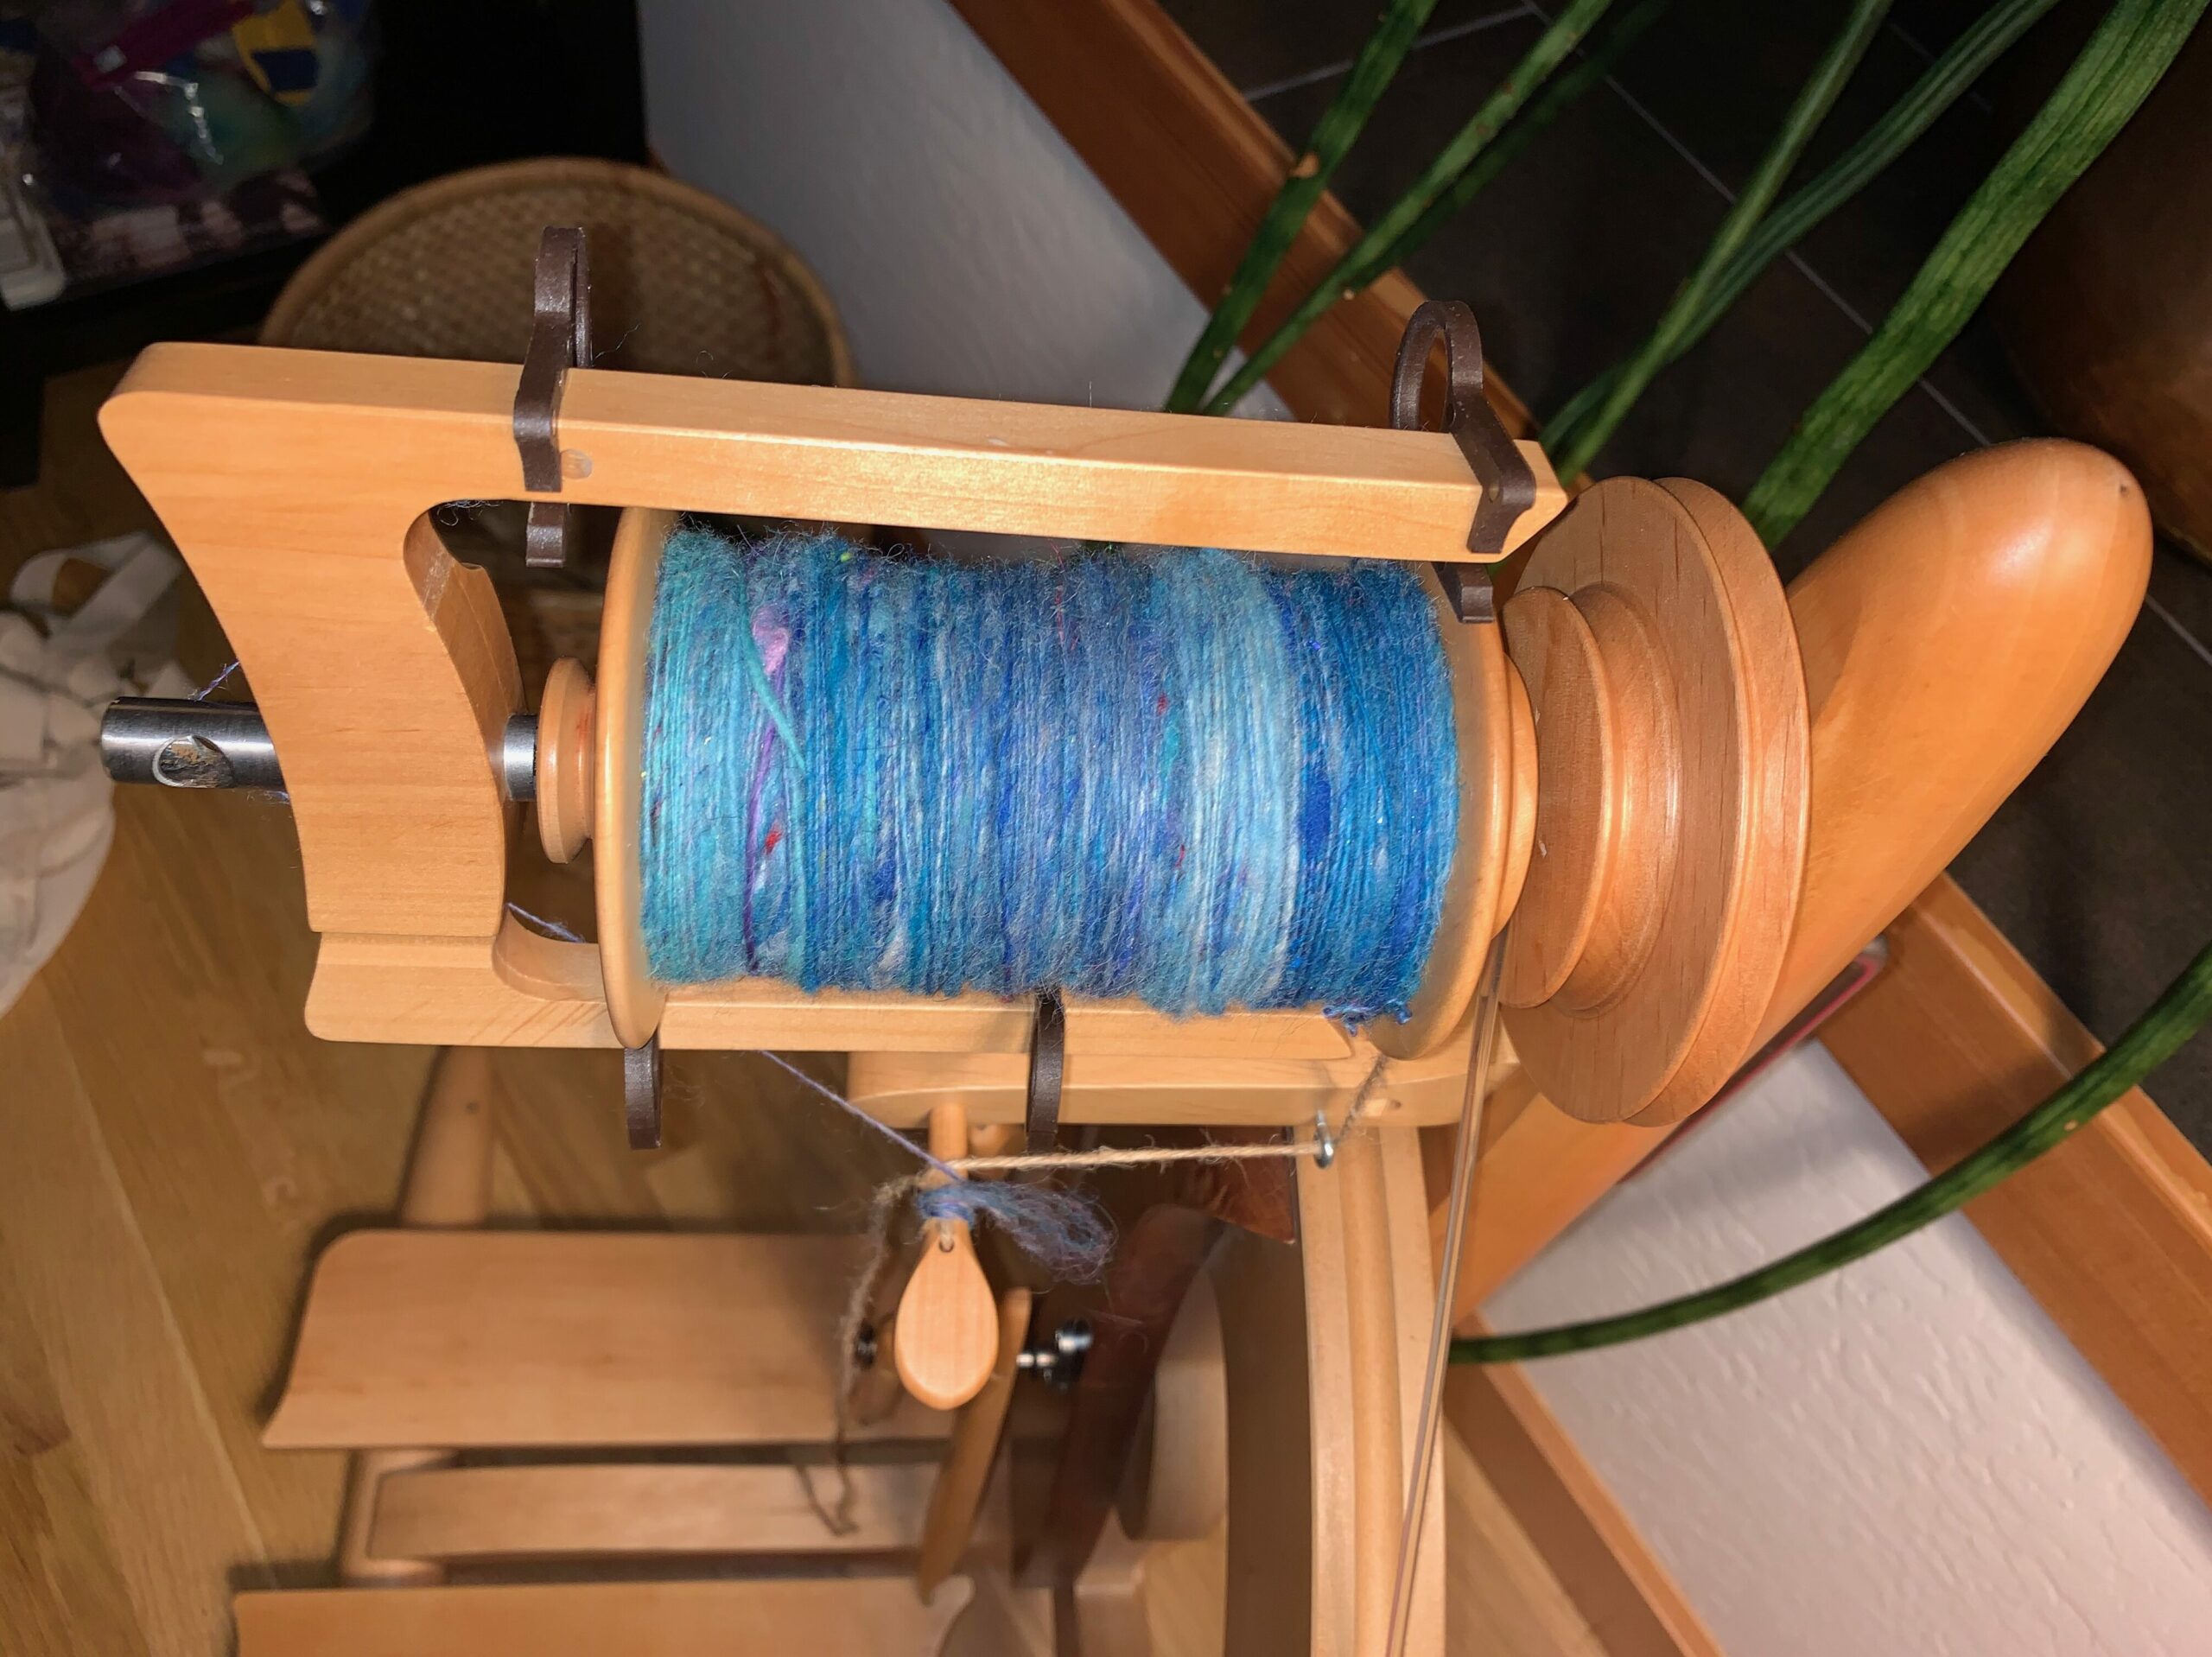 How to Use a Spinning Wheel (5 Simple Steps to Make Yarn) – Yarnhustler